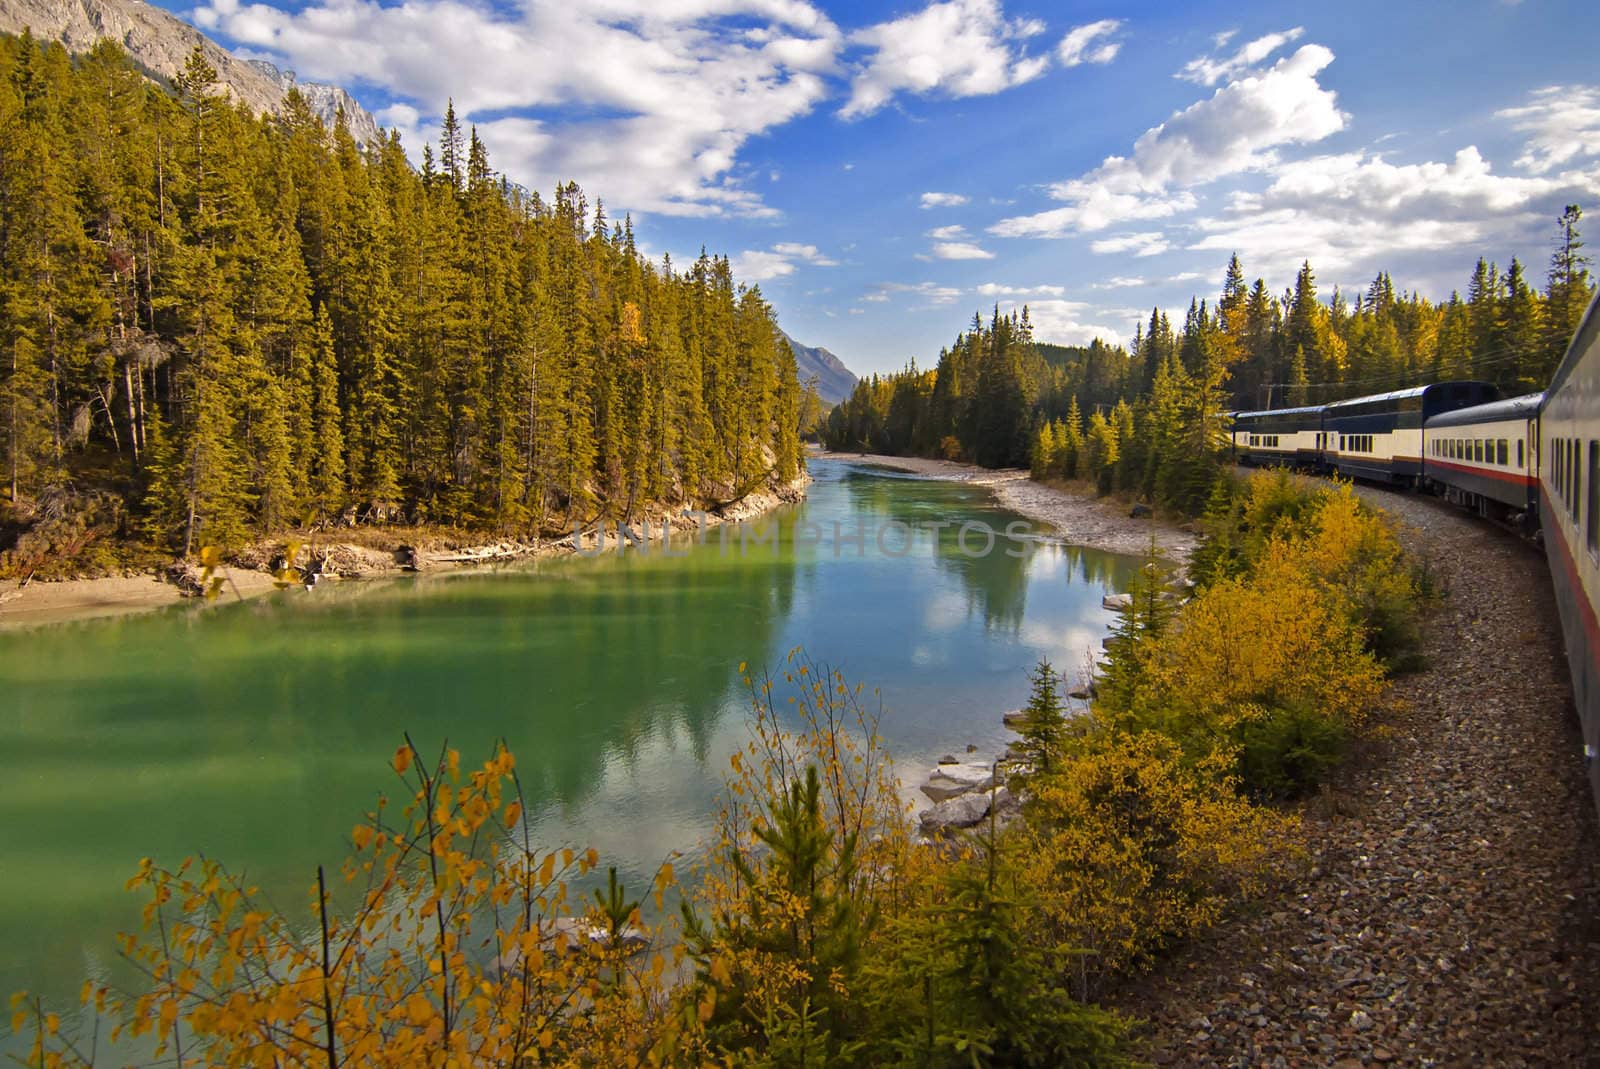 Train Journey through the Rocky Mountains, Canada